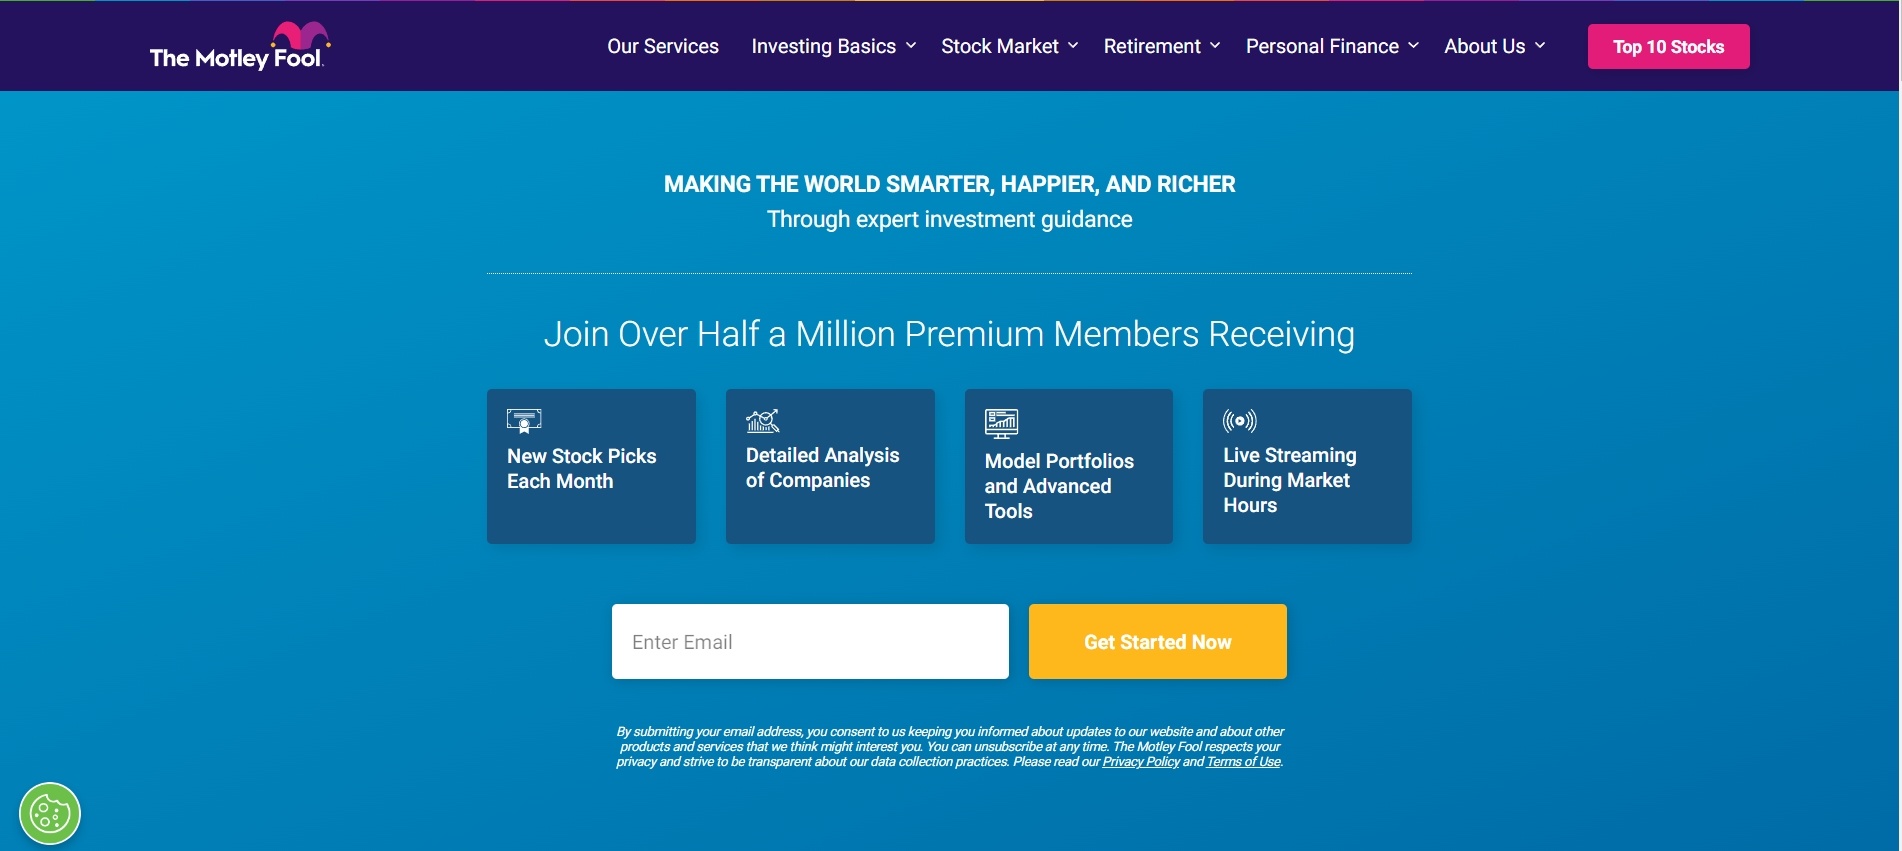 The Motley Fool asks users to get started now